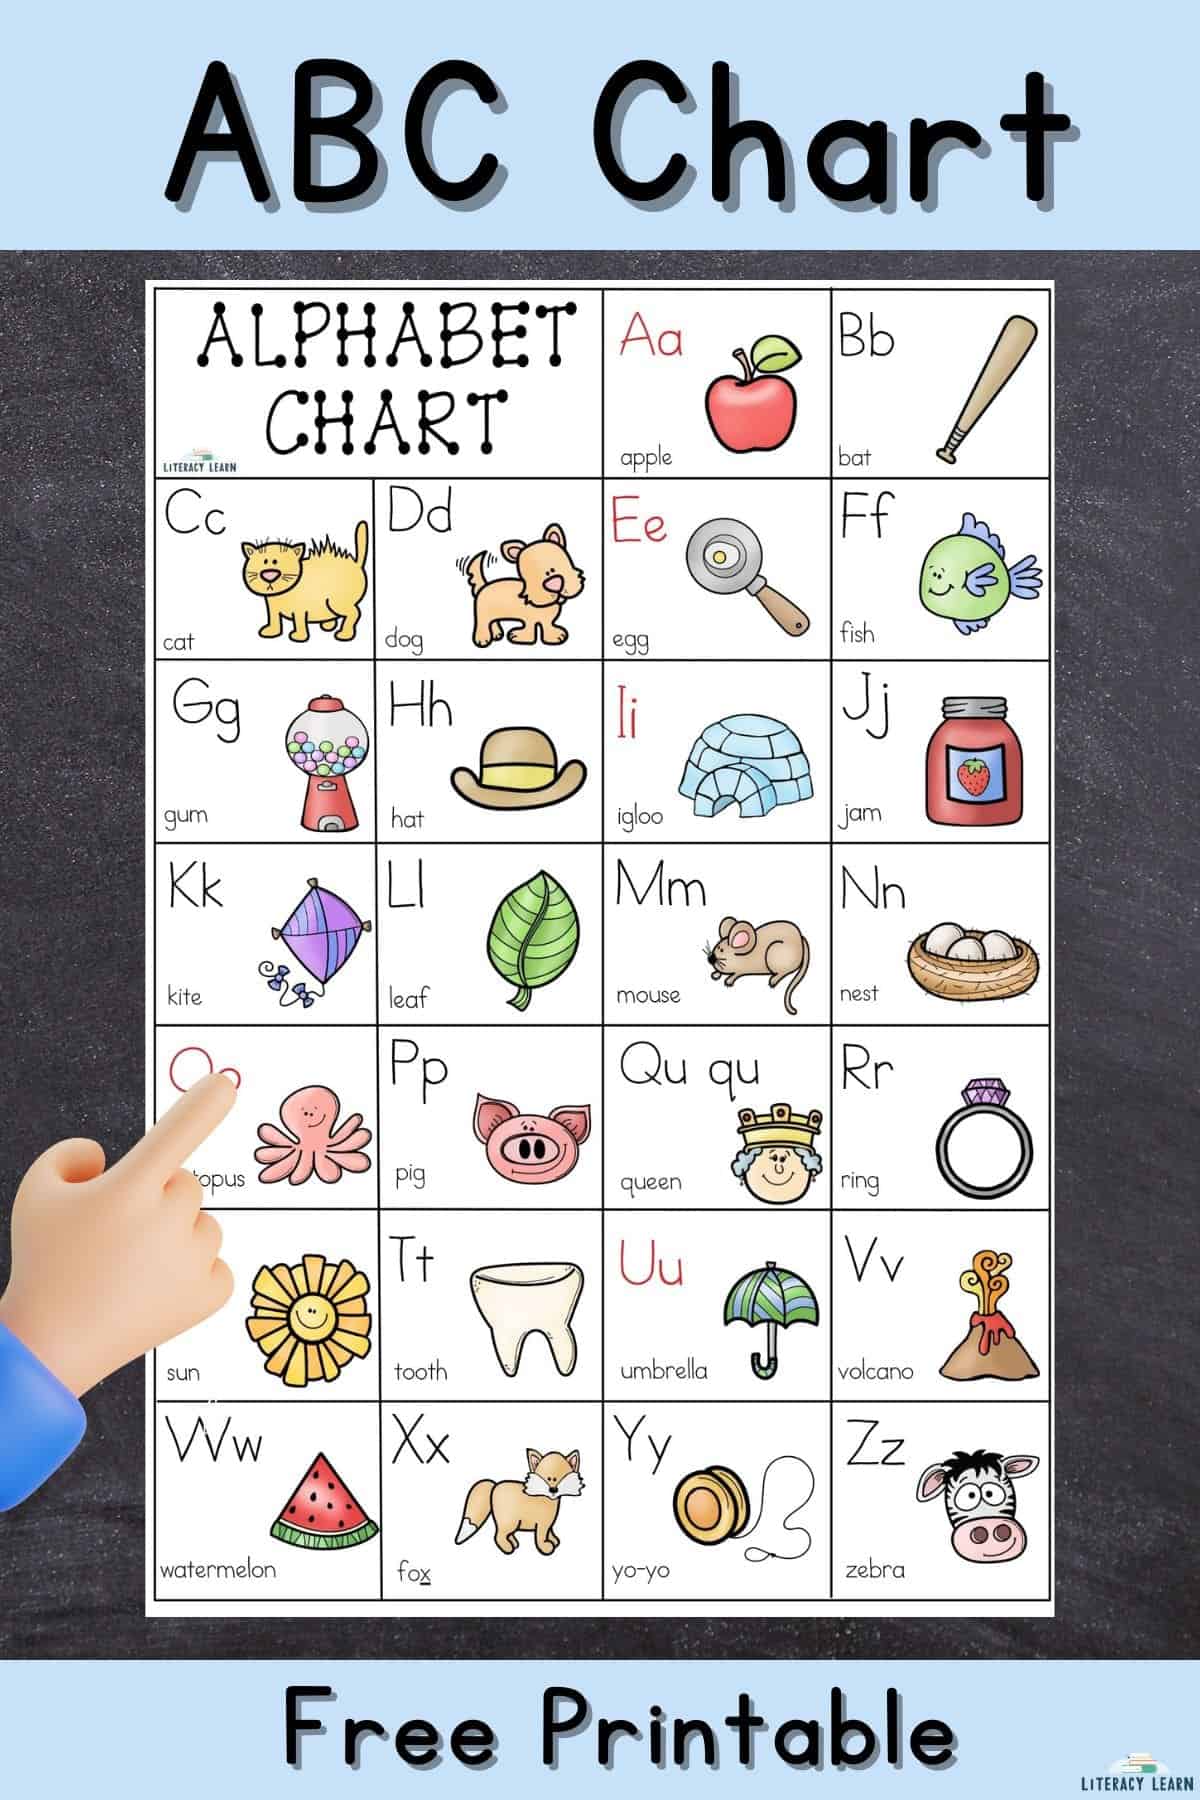 Large ABC chart with letters A-Z, pictures, and keywords on chalkboard background.